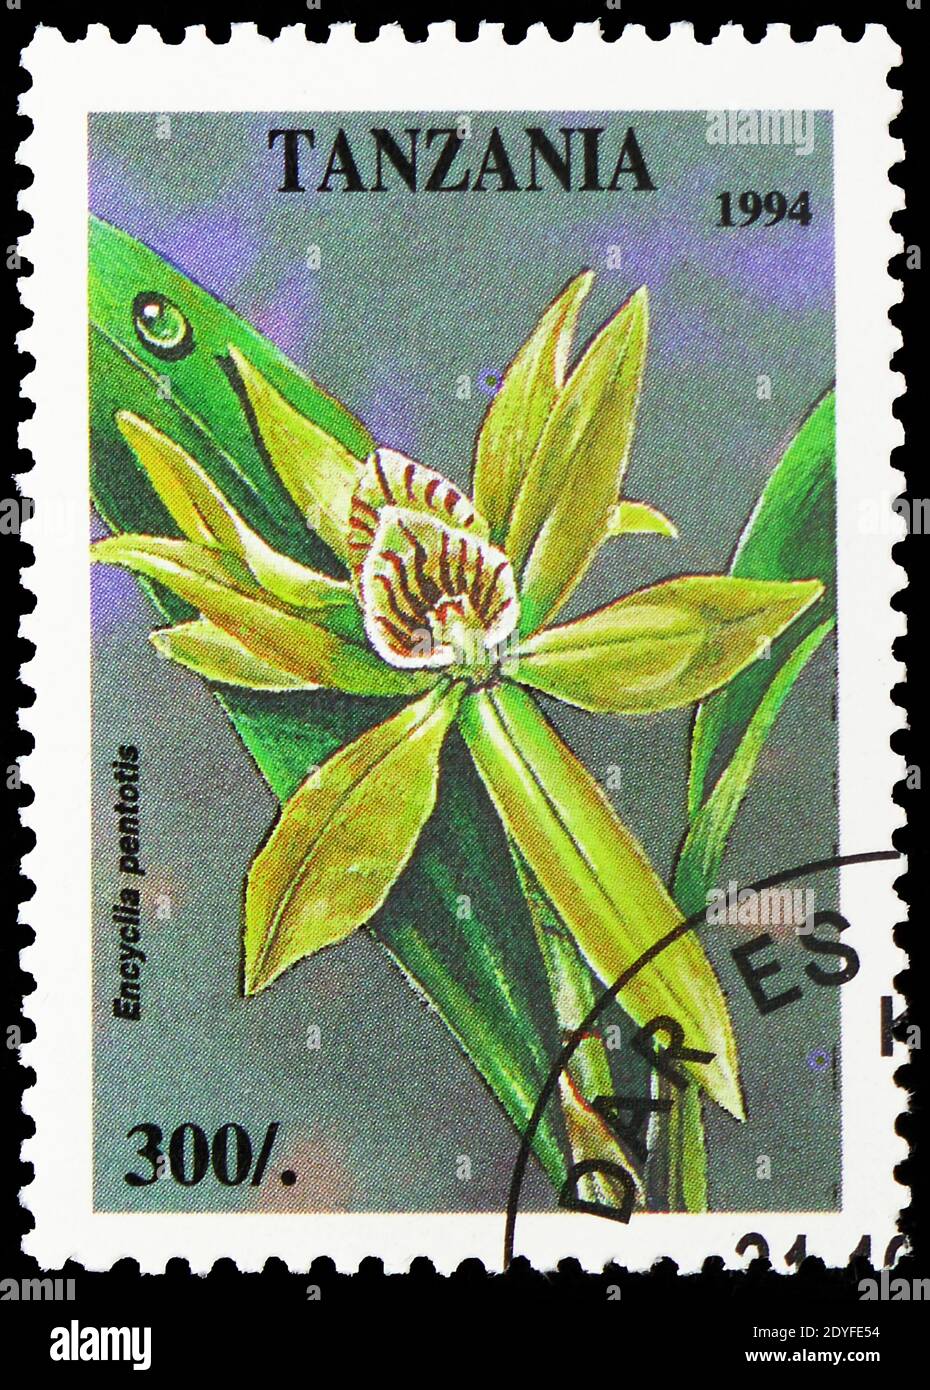 MOSCOW, RUSSIA - MAY 25, 2019: Postage stamp printed in Tanzania shows Encyclia pentotis, Tropical Flowers serie, circa 1994 Stock Photo